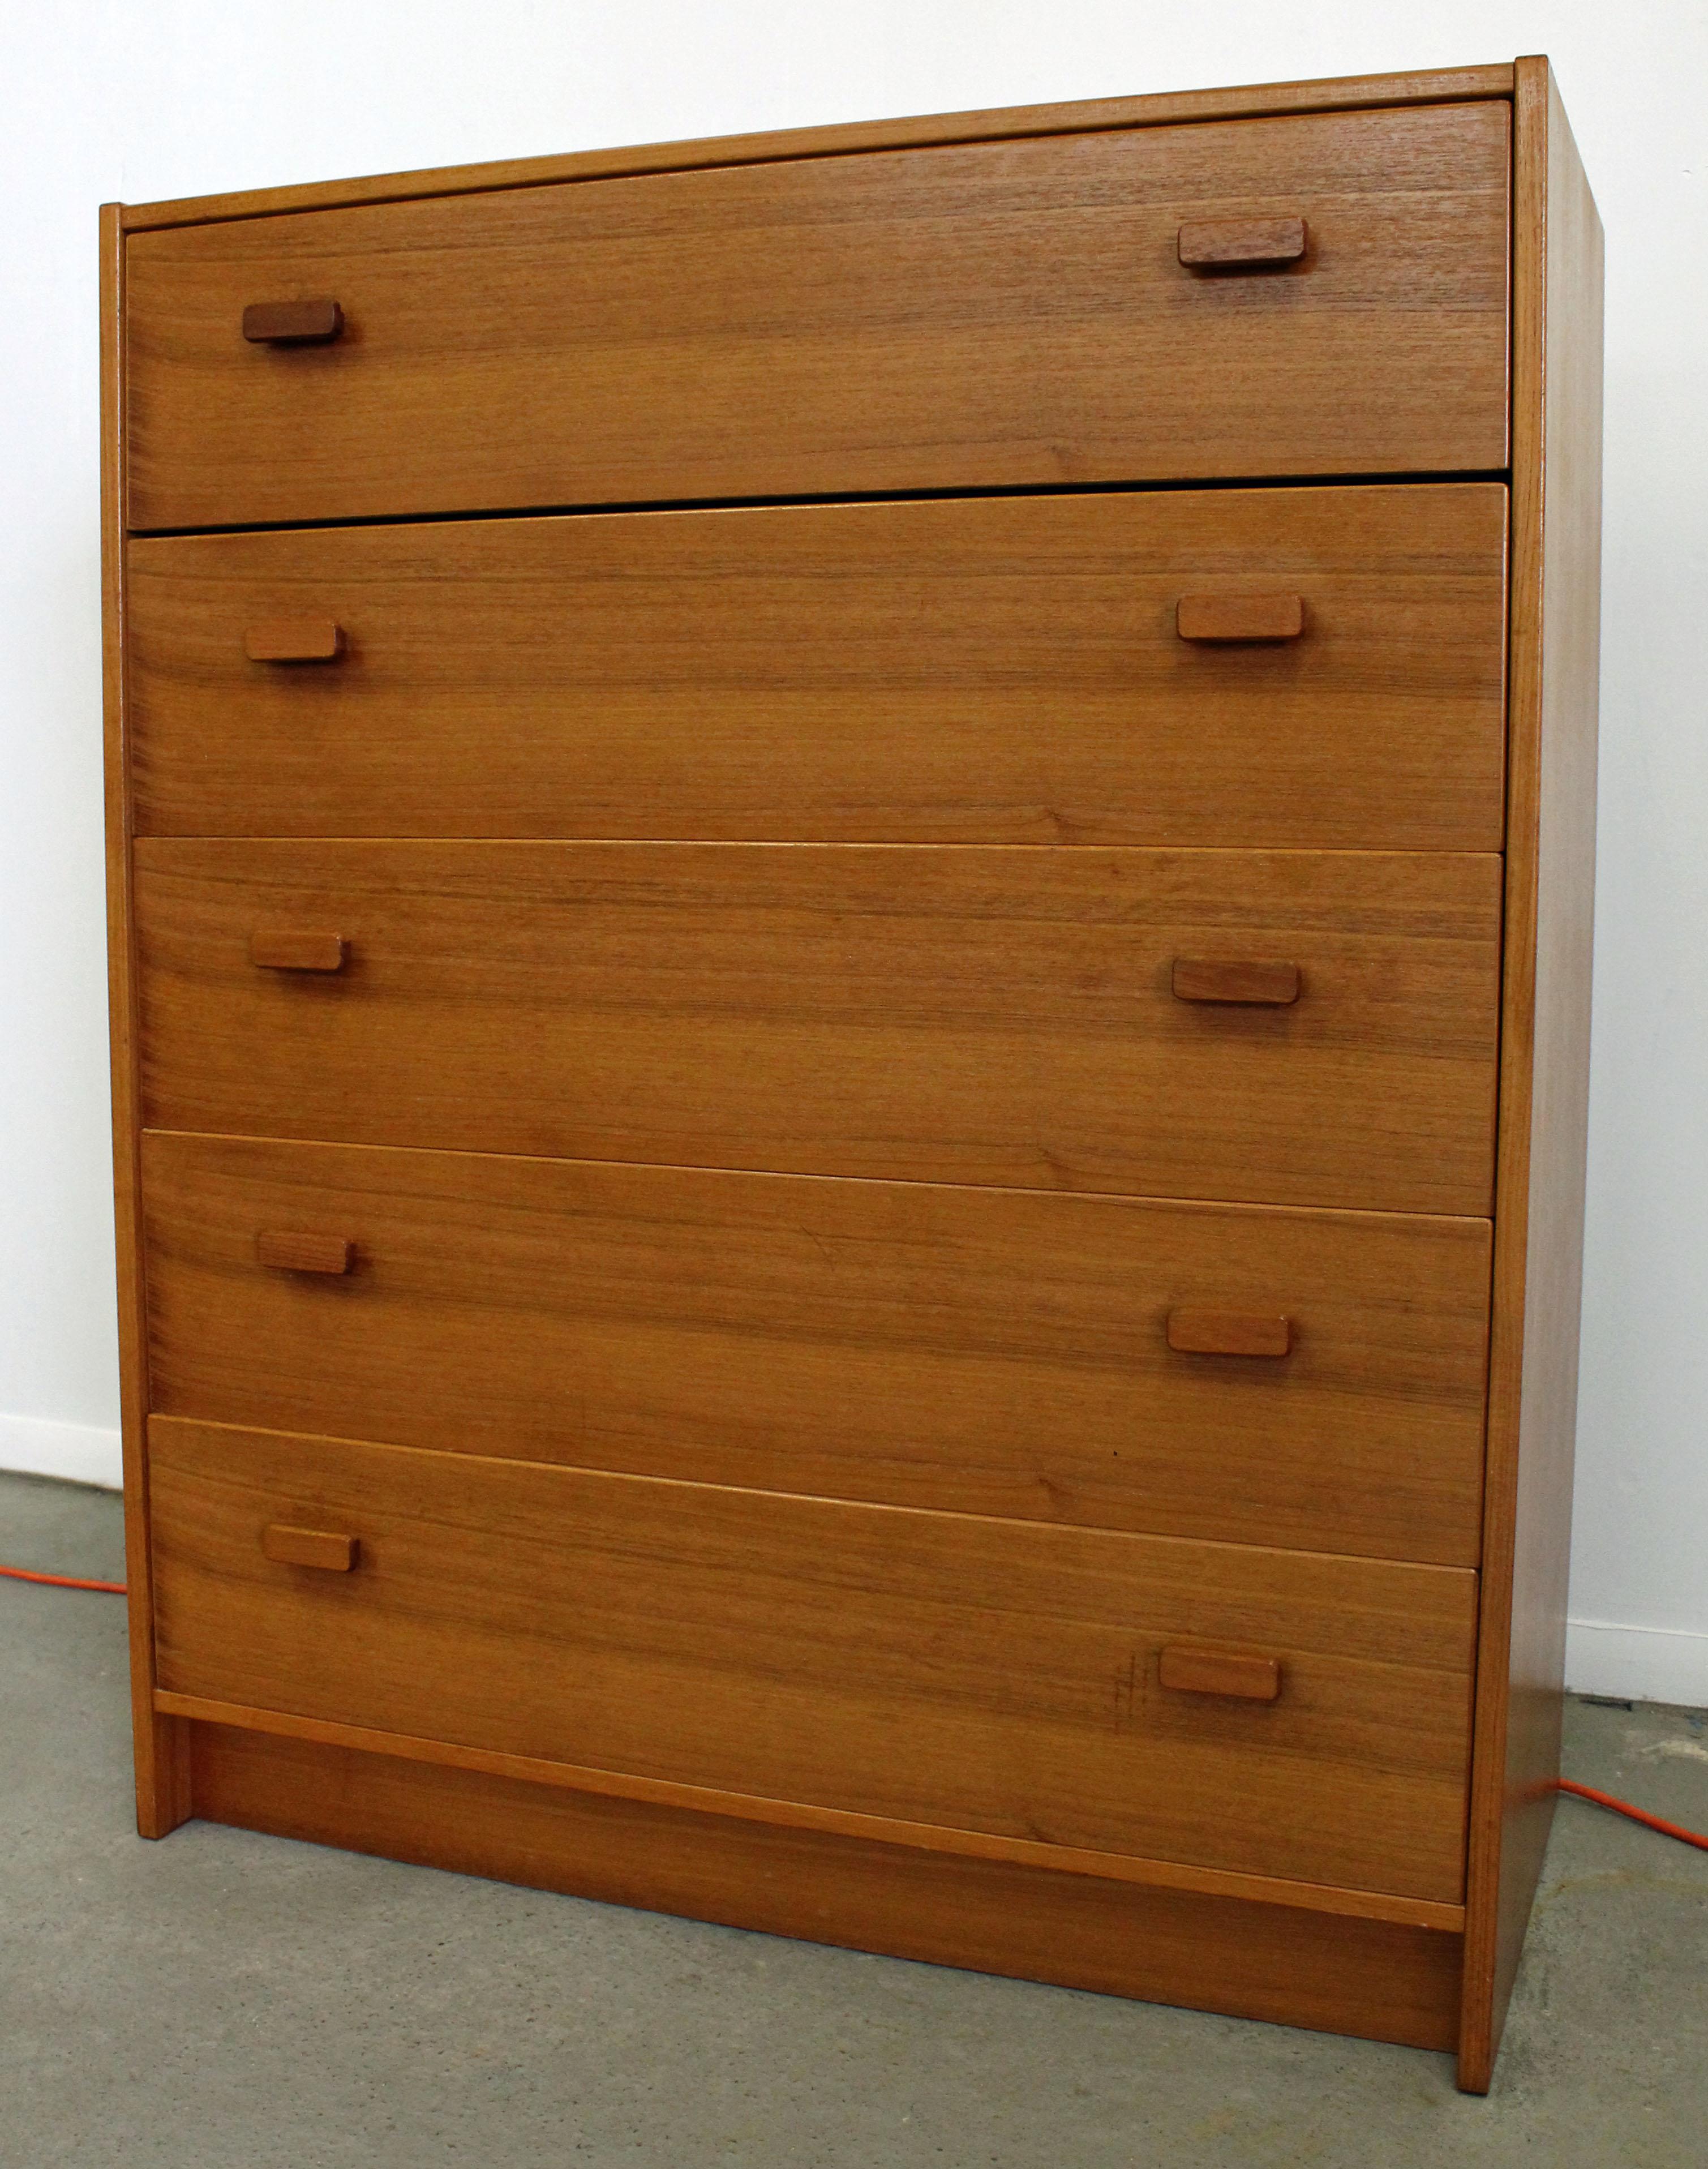 Offered is a Danish modern tall chest with sculpted pulls. The piece is made of teak and has 5 drawers. It is in good condition, shows some age wear, but nothing overly noticeable. It is not signed!

Dimensions:
34.75